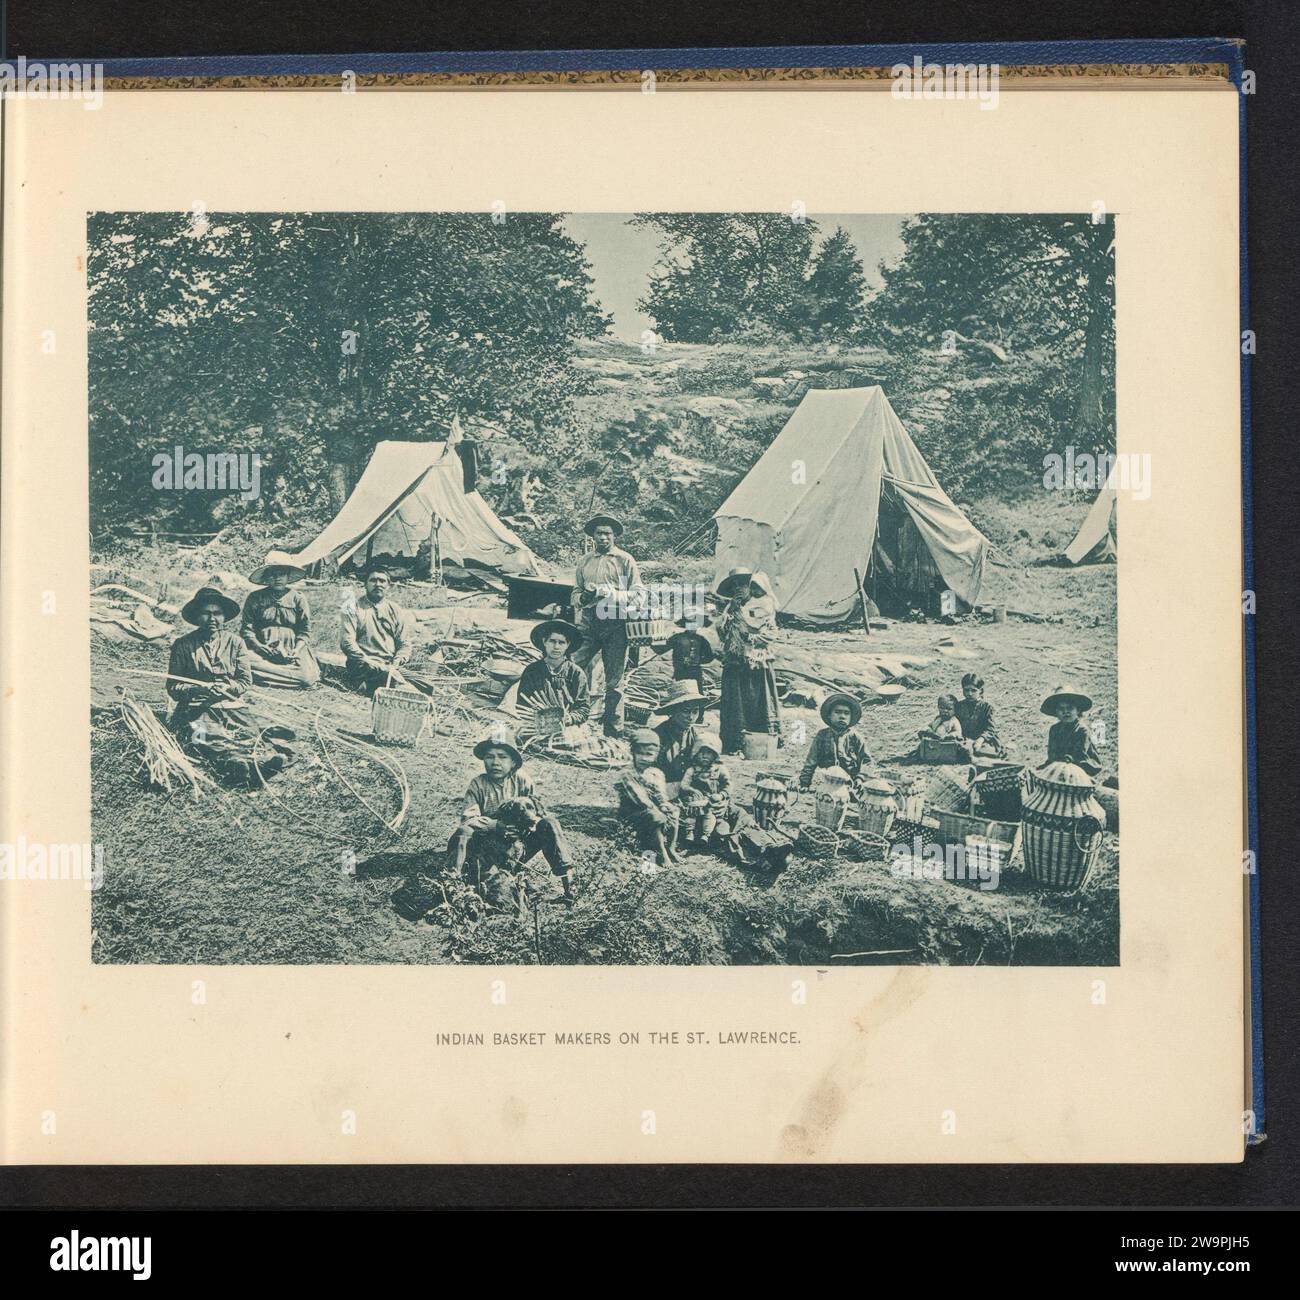 Mandenmakers on the banks of the Saint Lawrence River, Anonymous, c. 1883 - In or Before 1893 photomechanical print Men, women and children make baskets on the banks of the River Saint Lawrence. A few tents on the okay. This may be a Huron or Wendat community. United States of America paper collotype Native peoples of North America. container made of plant material other than wood: basket Stock Photo